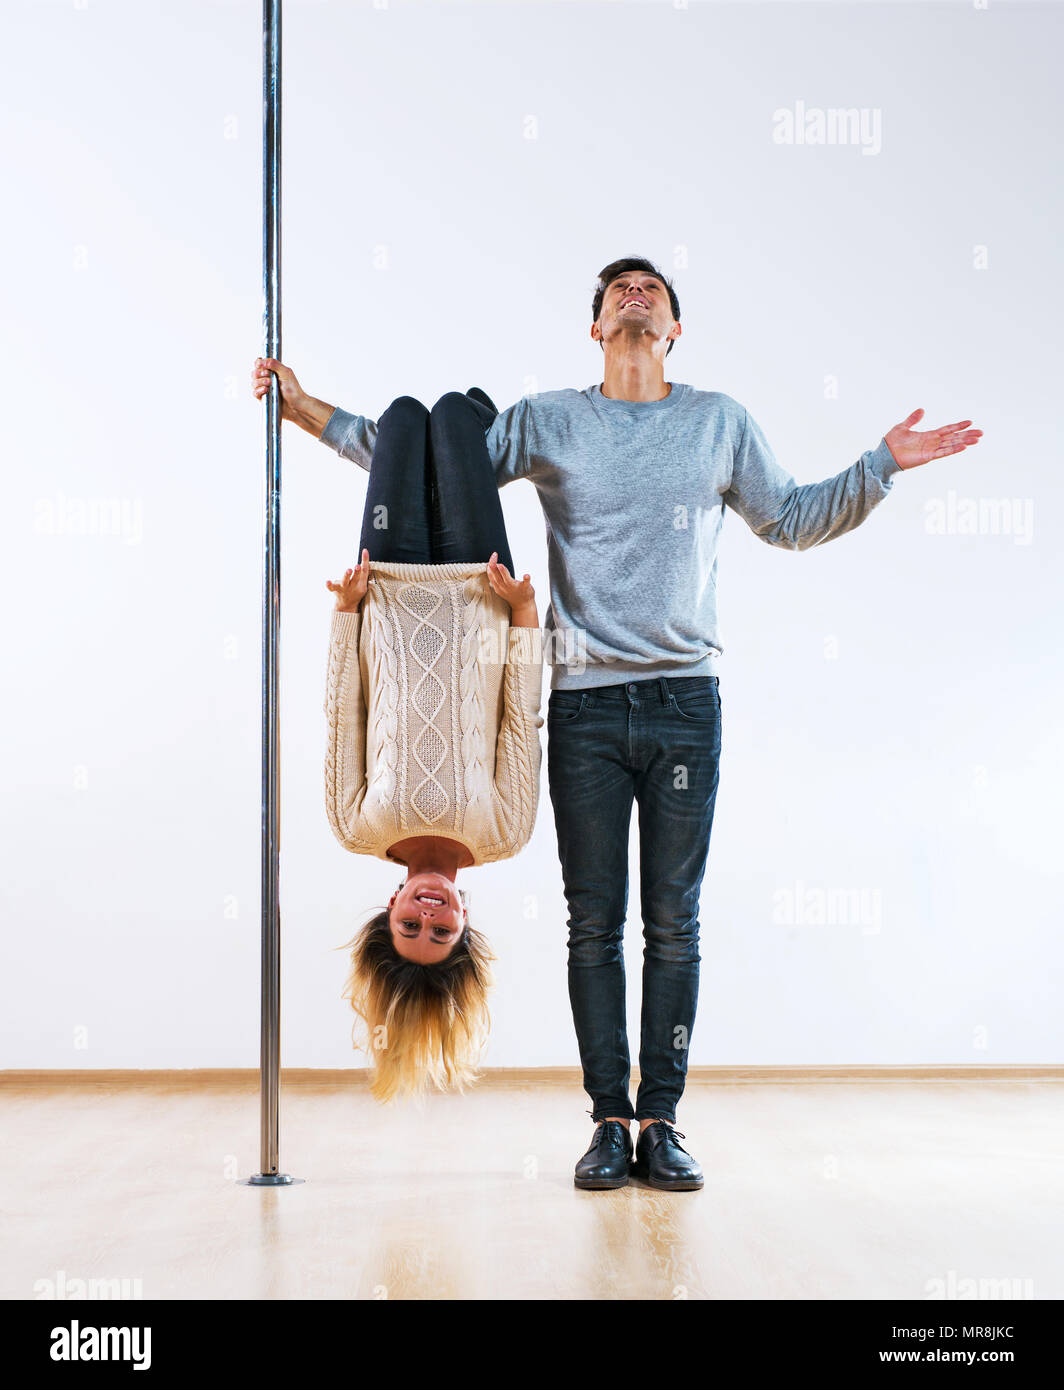 Young man and woman pole dancers in casual clothing happy emotions Stock Photo